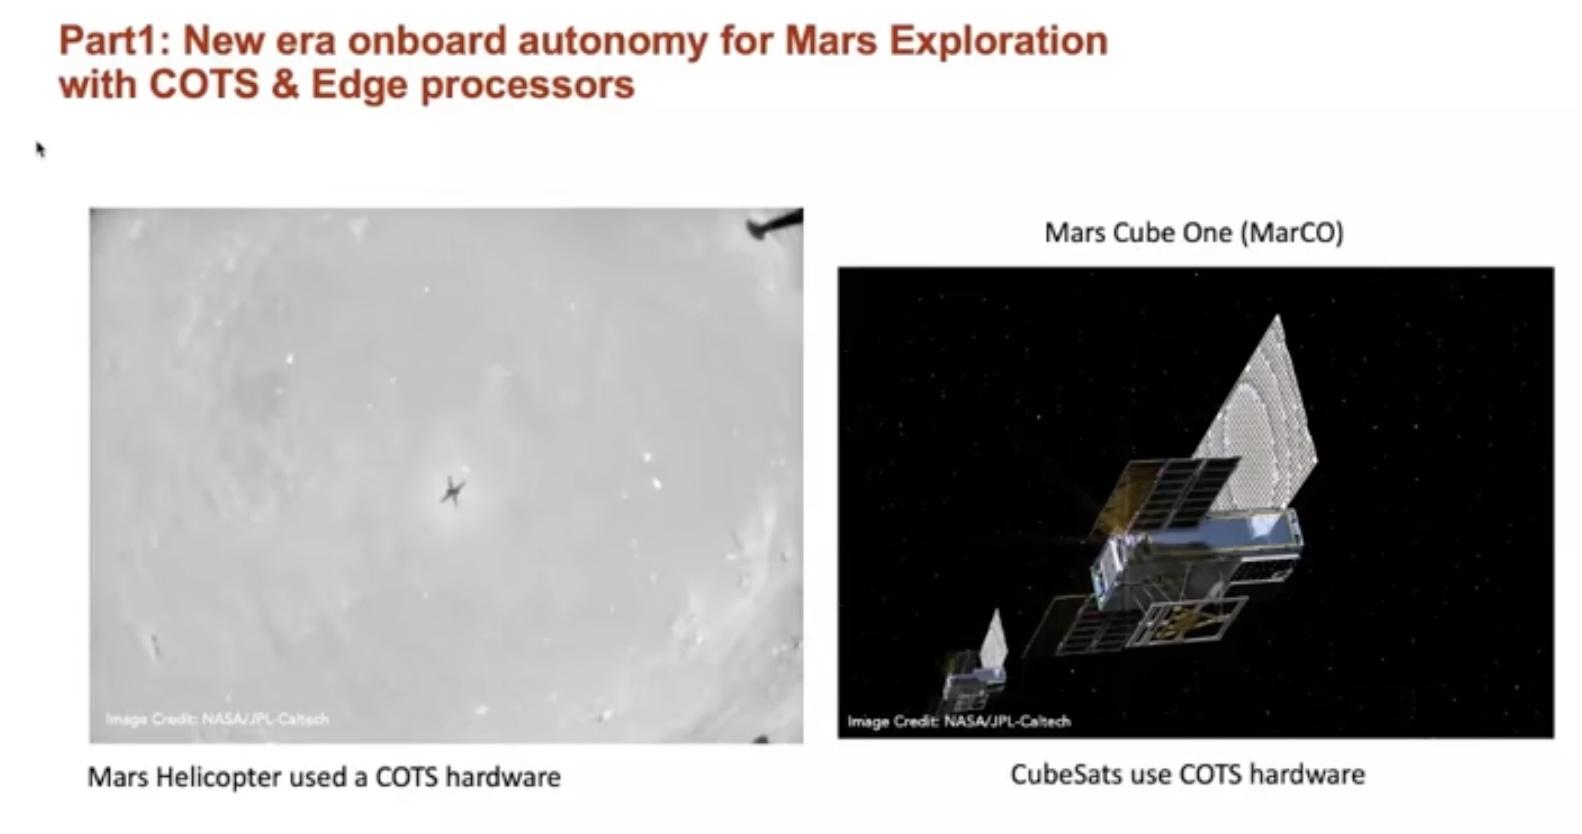 Part 1: New era onboard autonomy for Mars exploration with COTS and Edge processors 